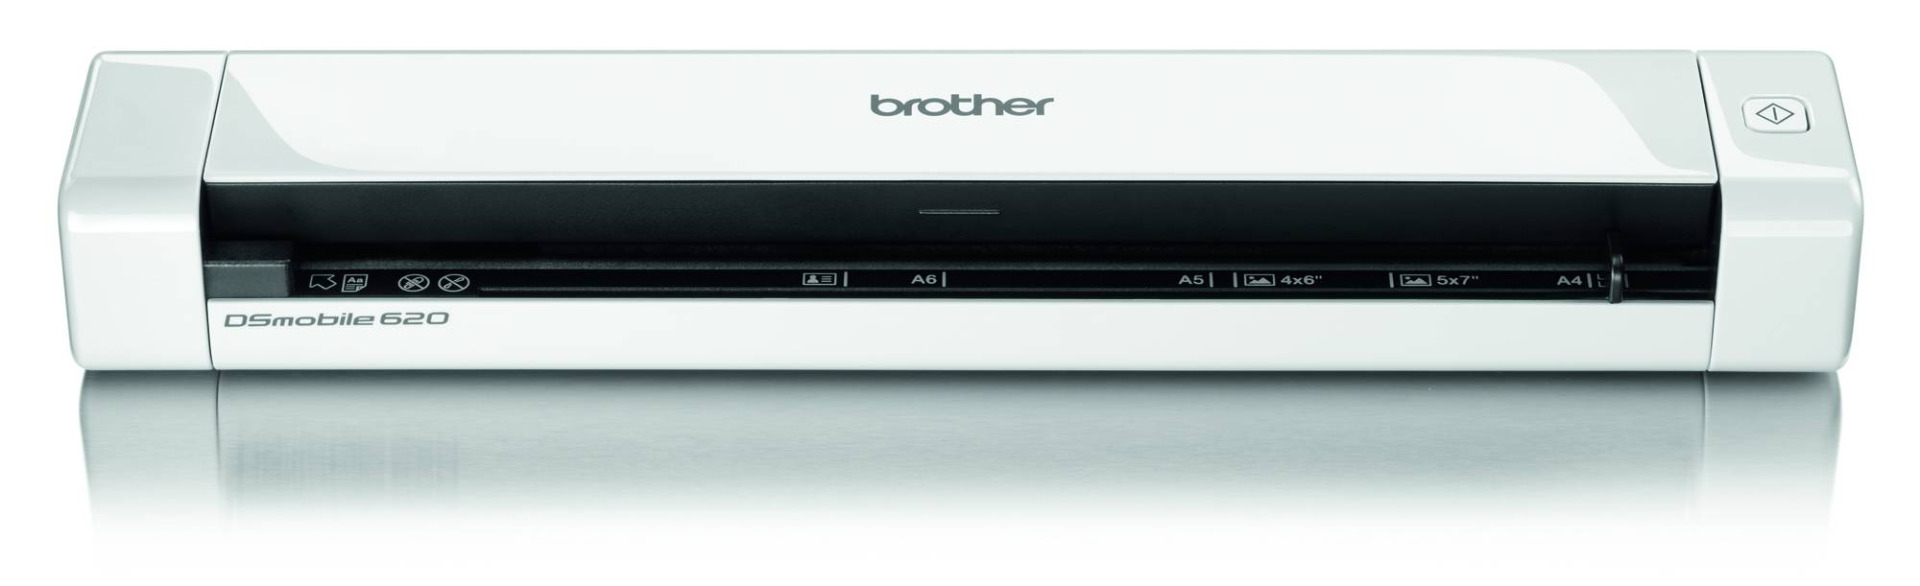 https://www.initpc.it/wp-content/uploads/2023/03/brother-ds620z1-printers-scanners-265851_unps-7g.jpg